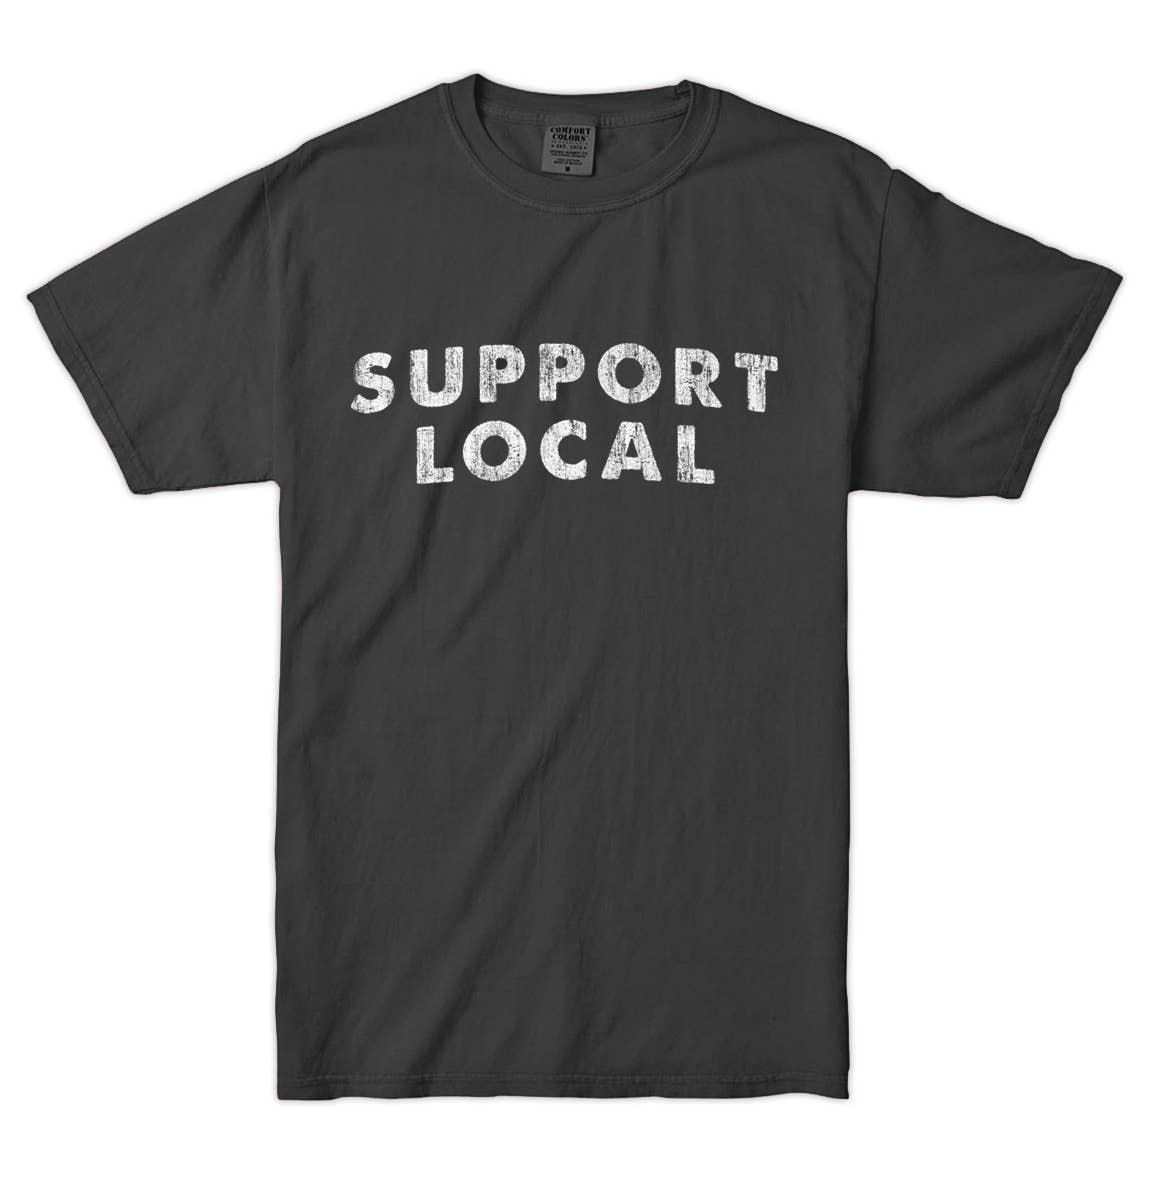 Support Local - Shirt